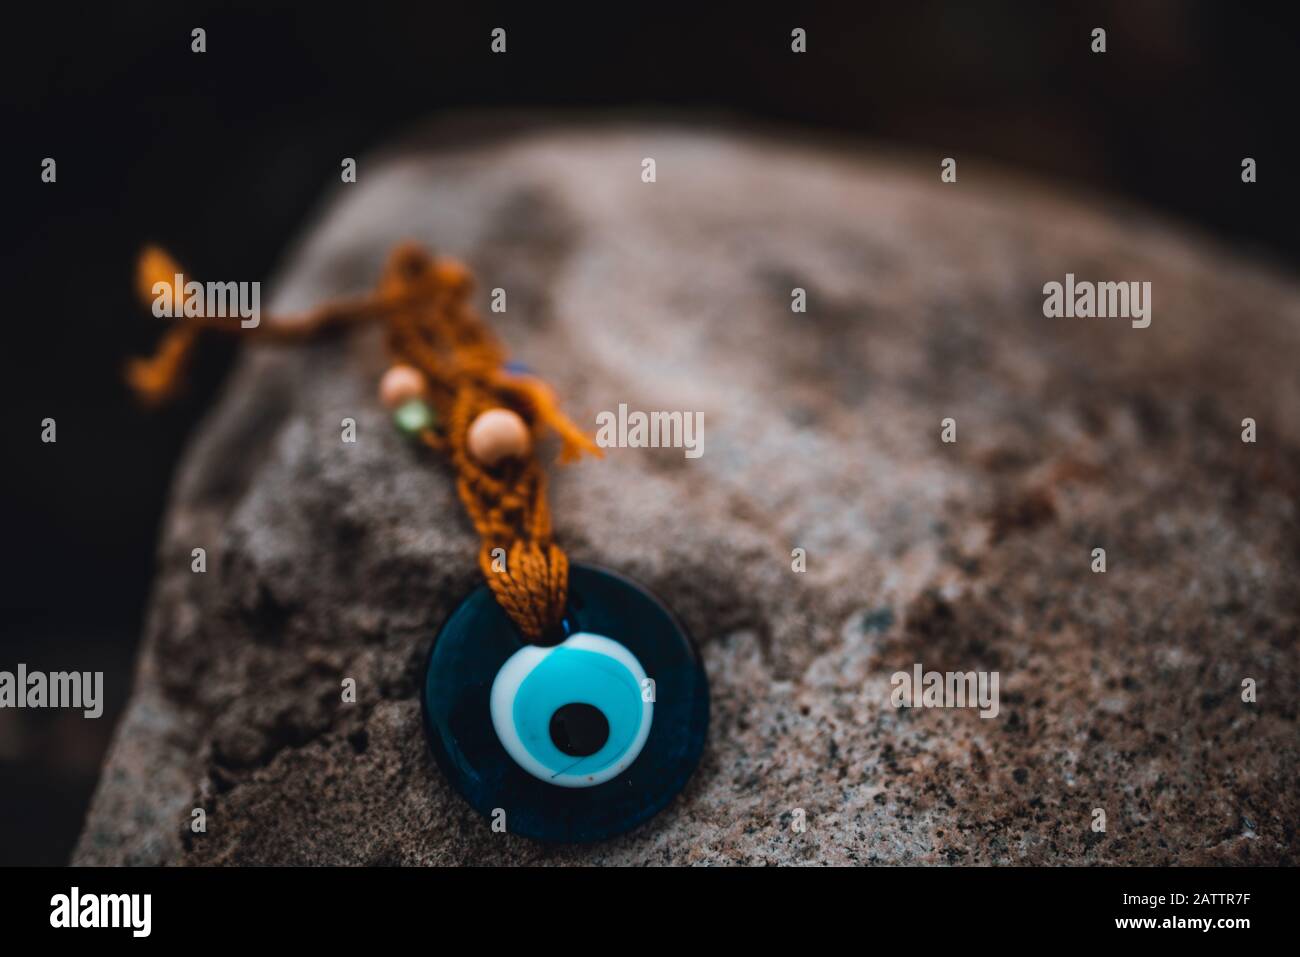 Beautiful evil eye bead on the rock. Culture Concept. Stock Photo